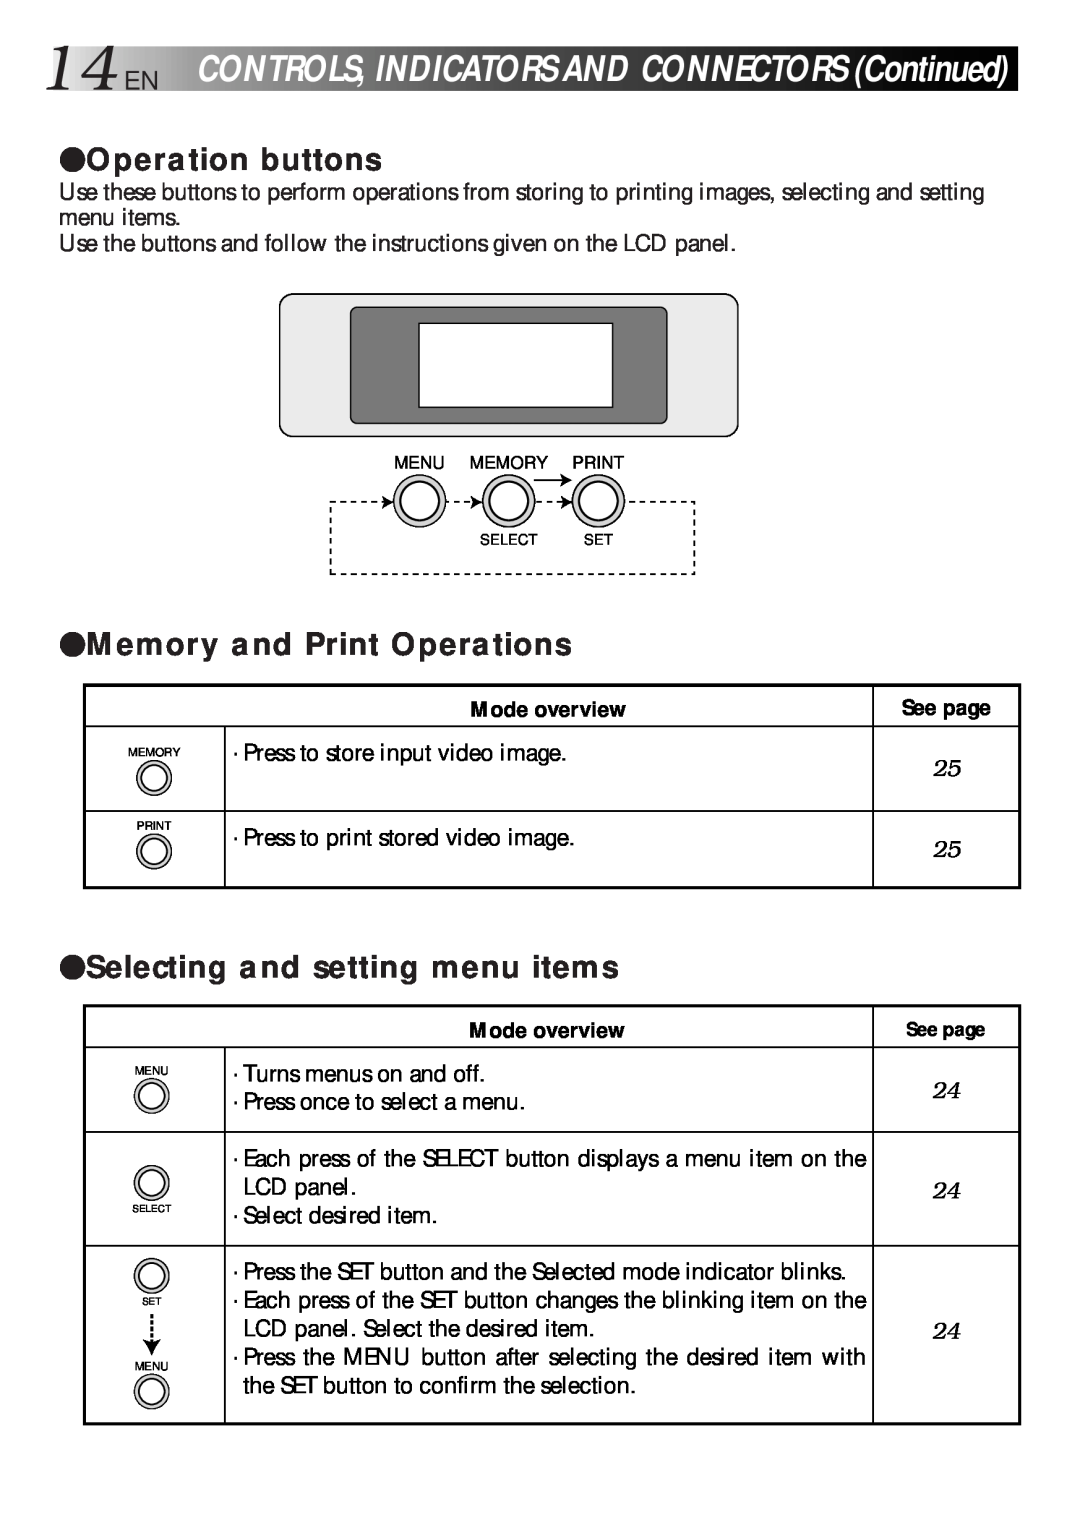 JVC GV-HT1U manual 14EN, Operation buttons, Memory and Print Operations, Selecting and setting menu items 